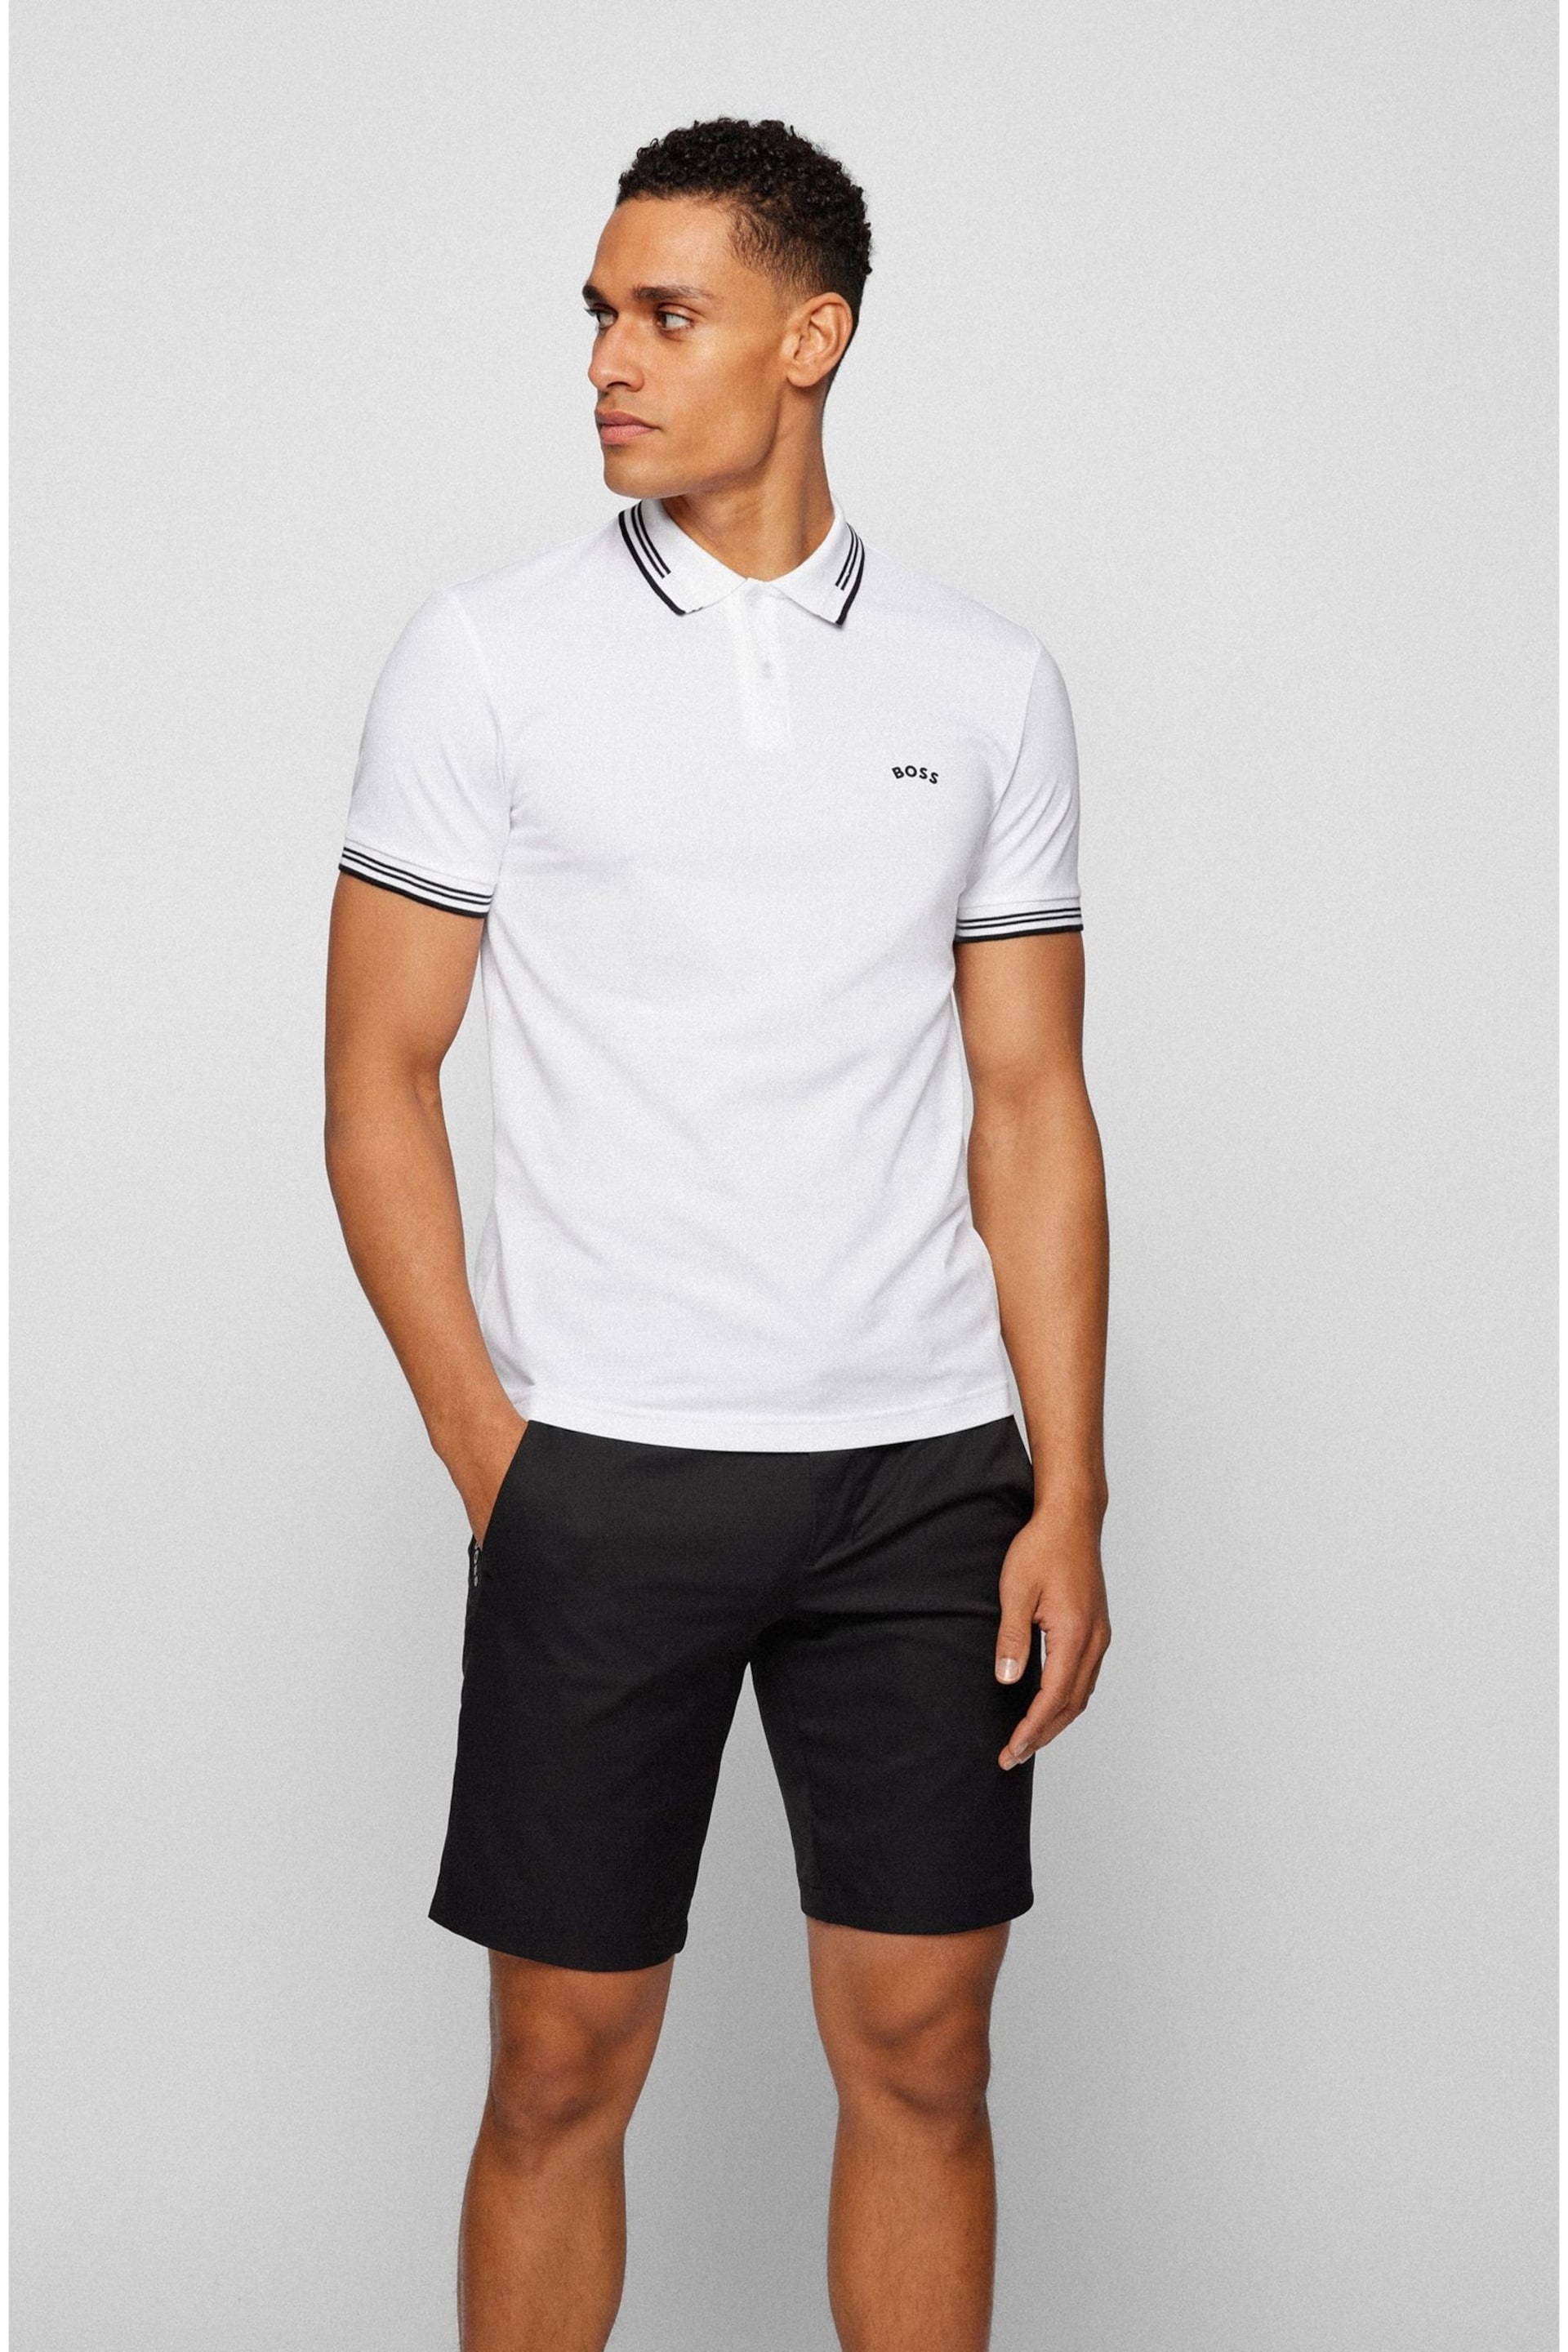 BOSS White Tipped Slim Fit Stretch Cotton Polo Shirt - Image 1 of 5